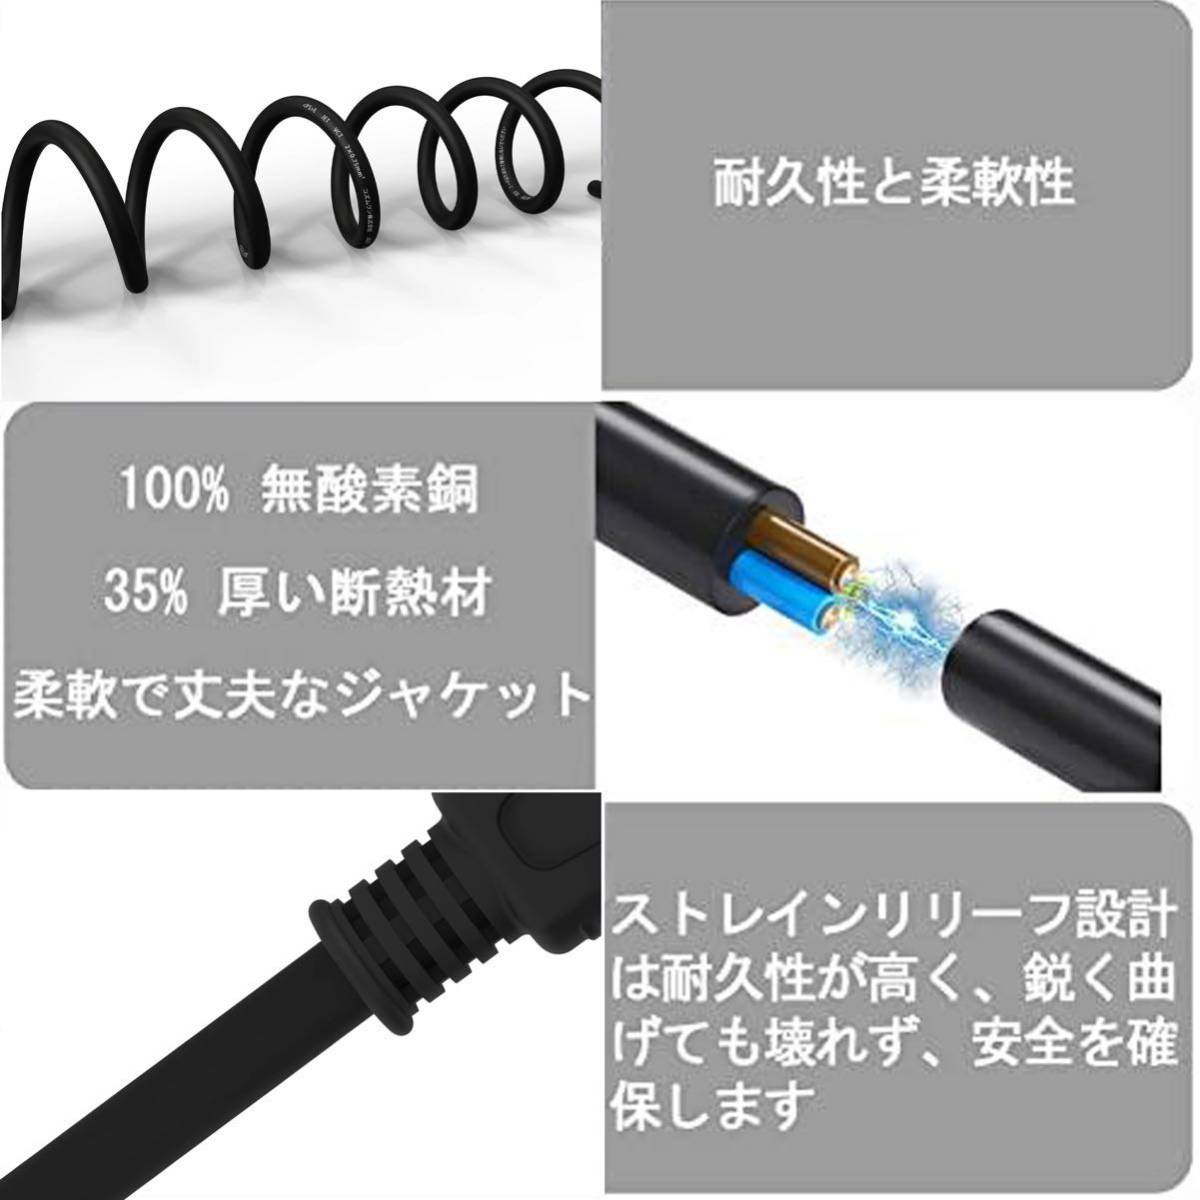  power supply cable extension cable 10m 15A 1500W till outdoors for waterproof work for soft type DIY practical use home use power supply code LED power supply PSE certification 